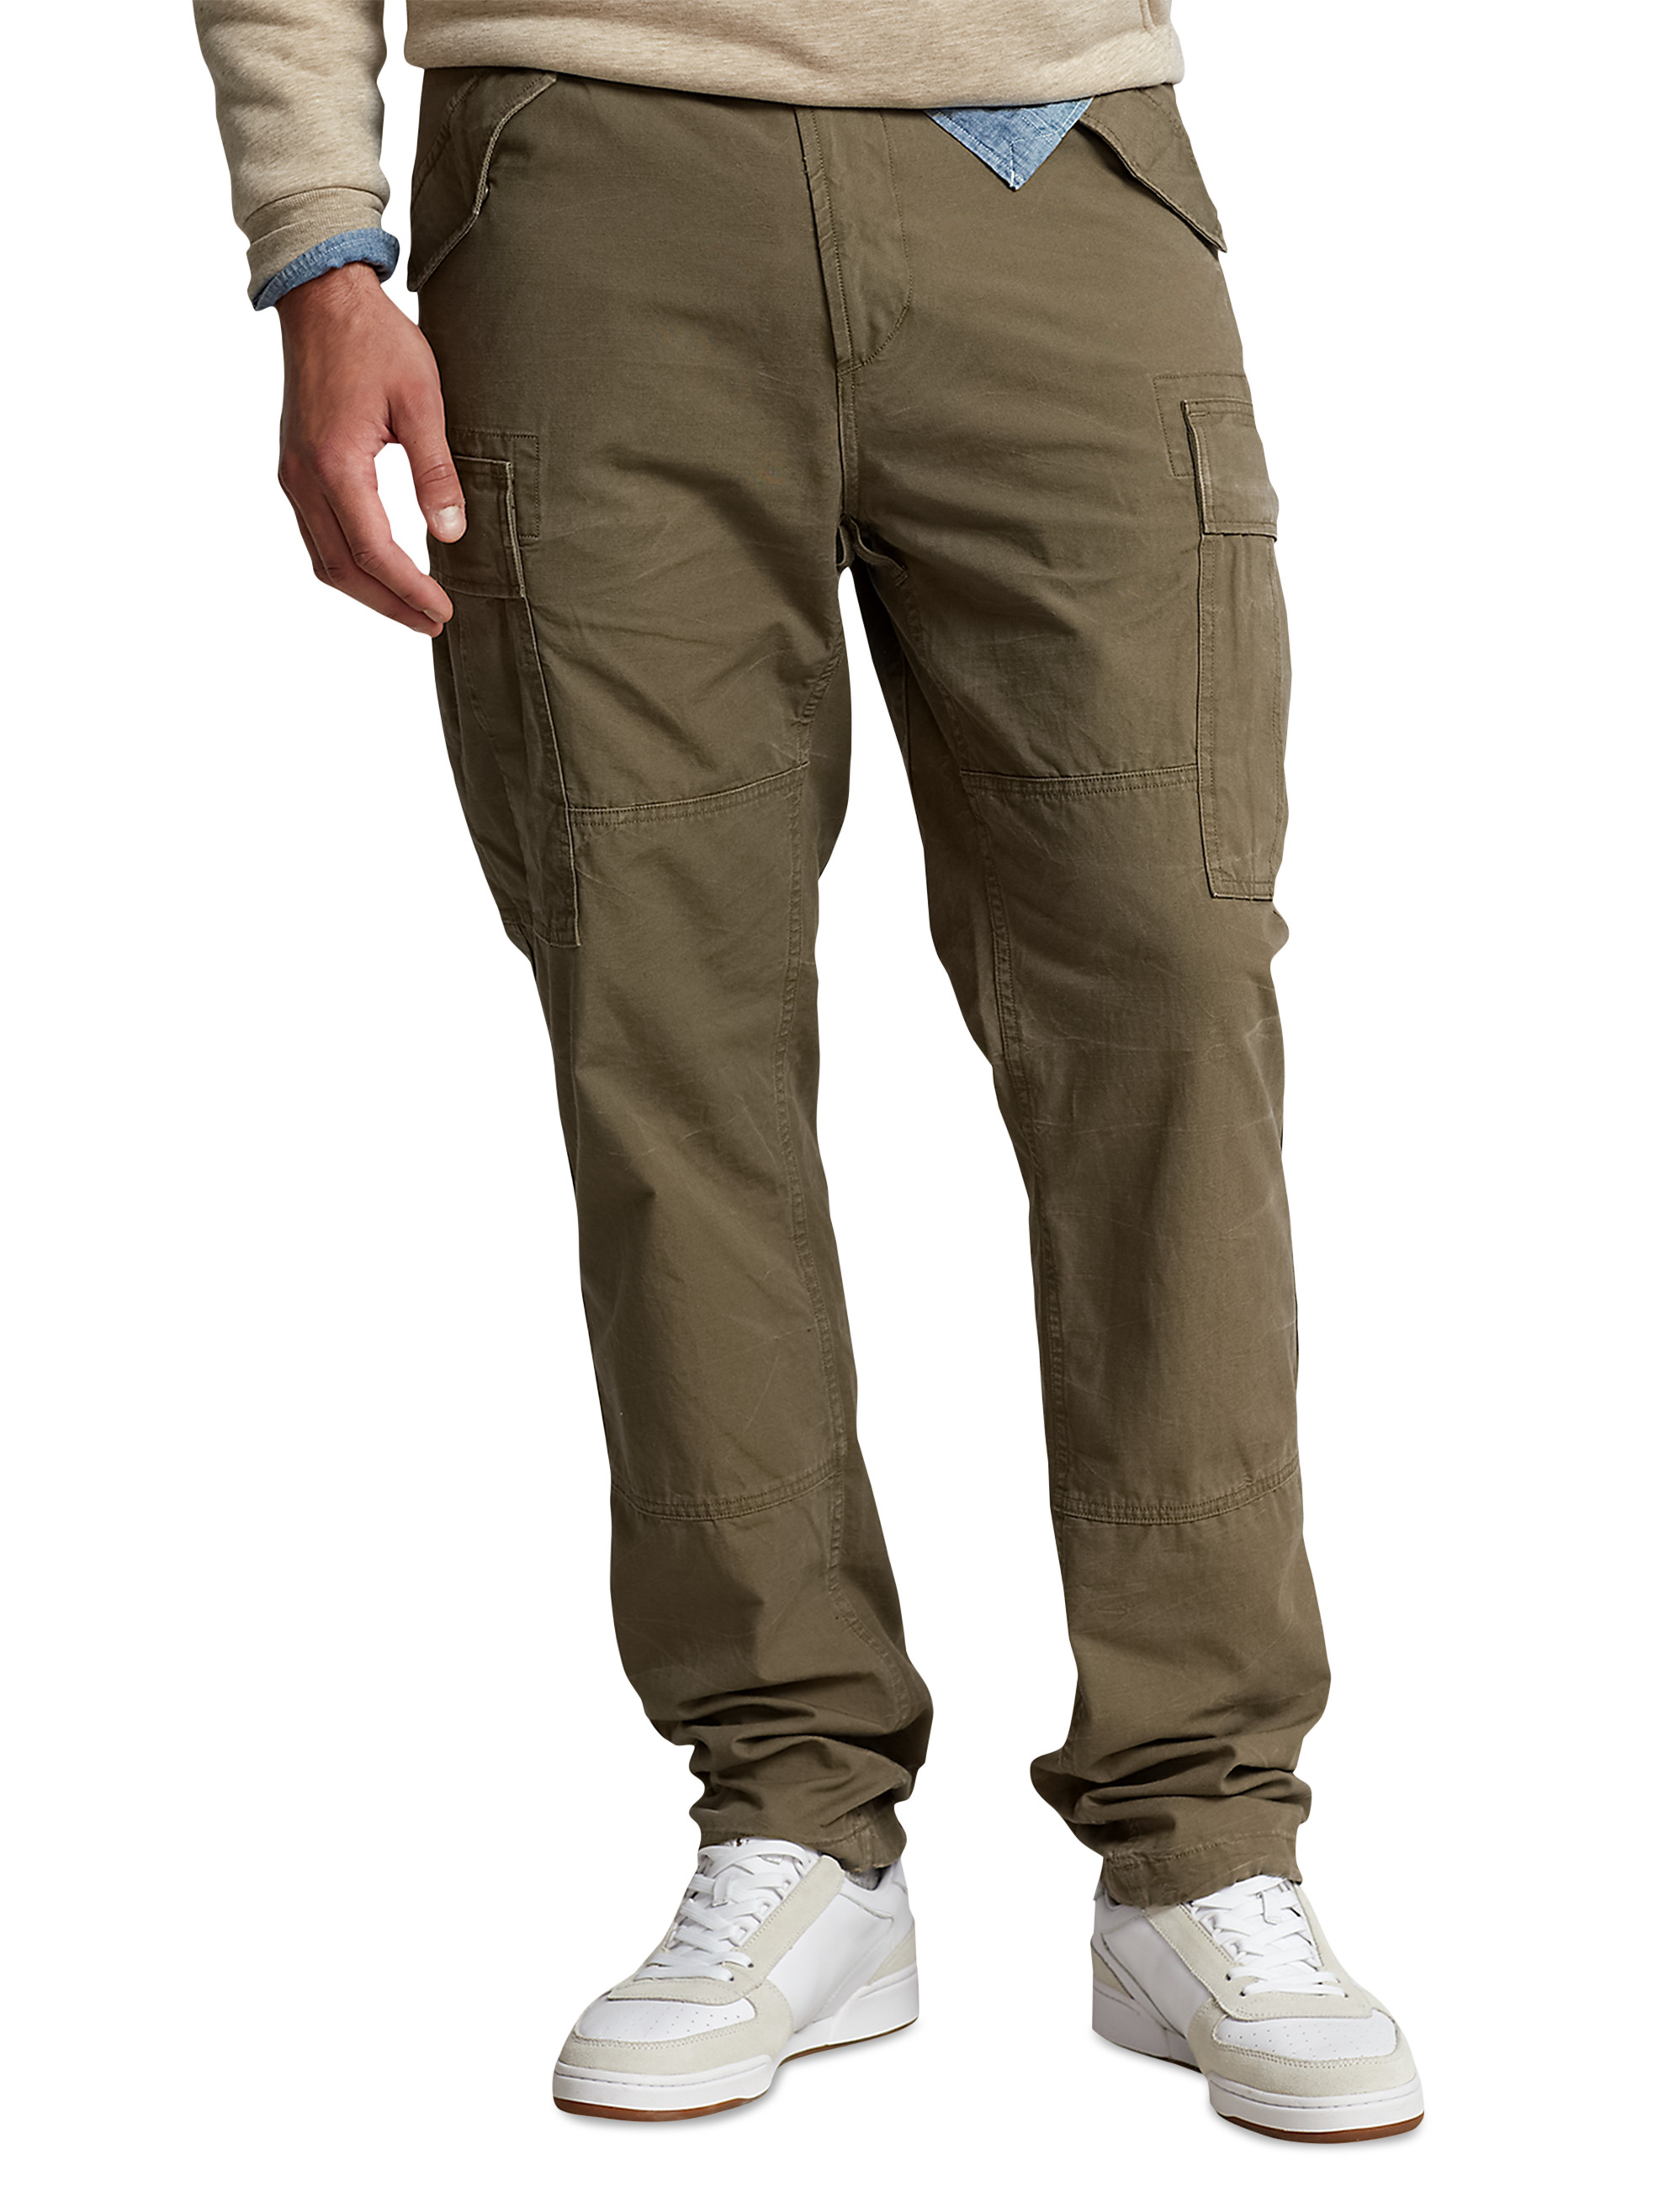 Big and Tall | Polo Ralph Lauren Cargo Pants | DXL Men's Clothing Store